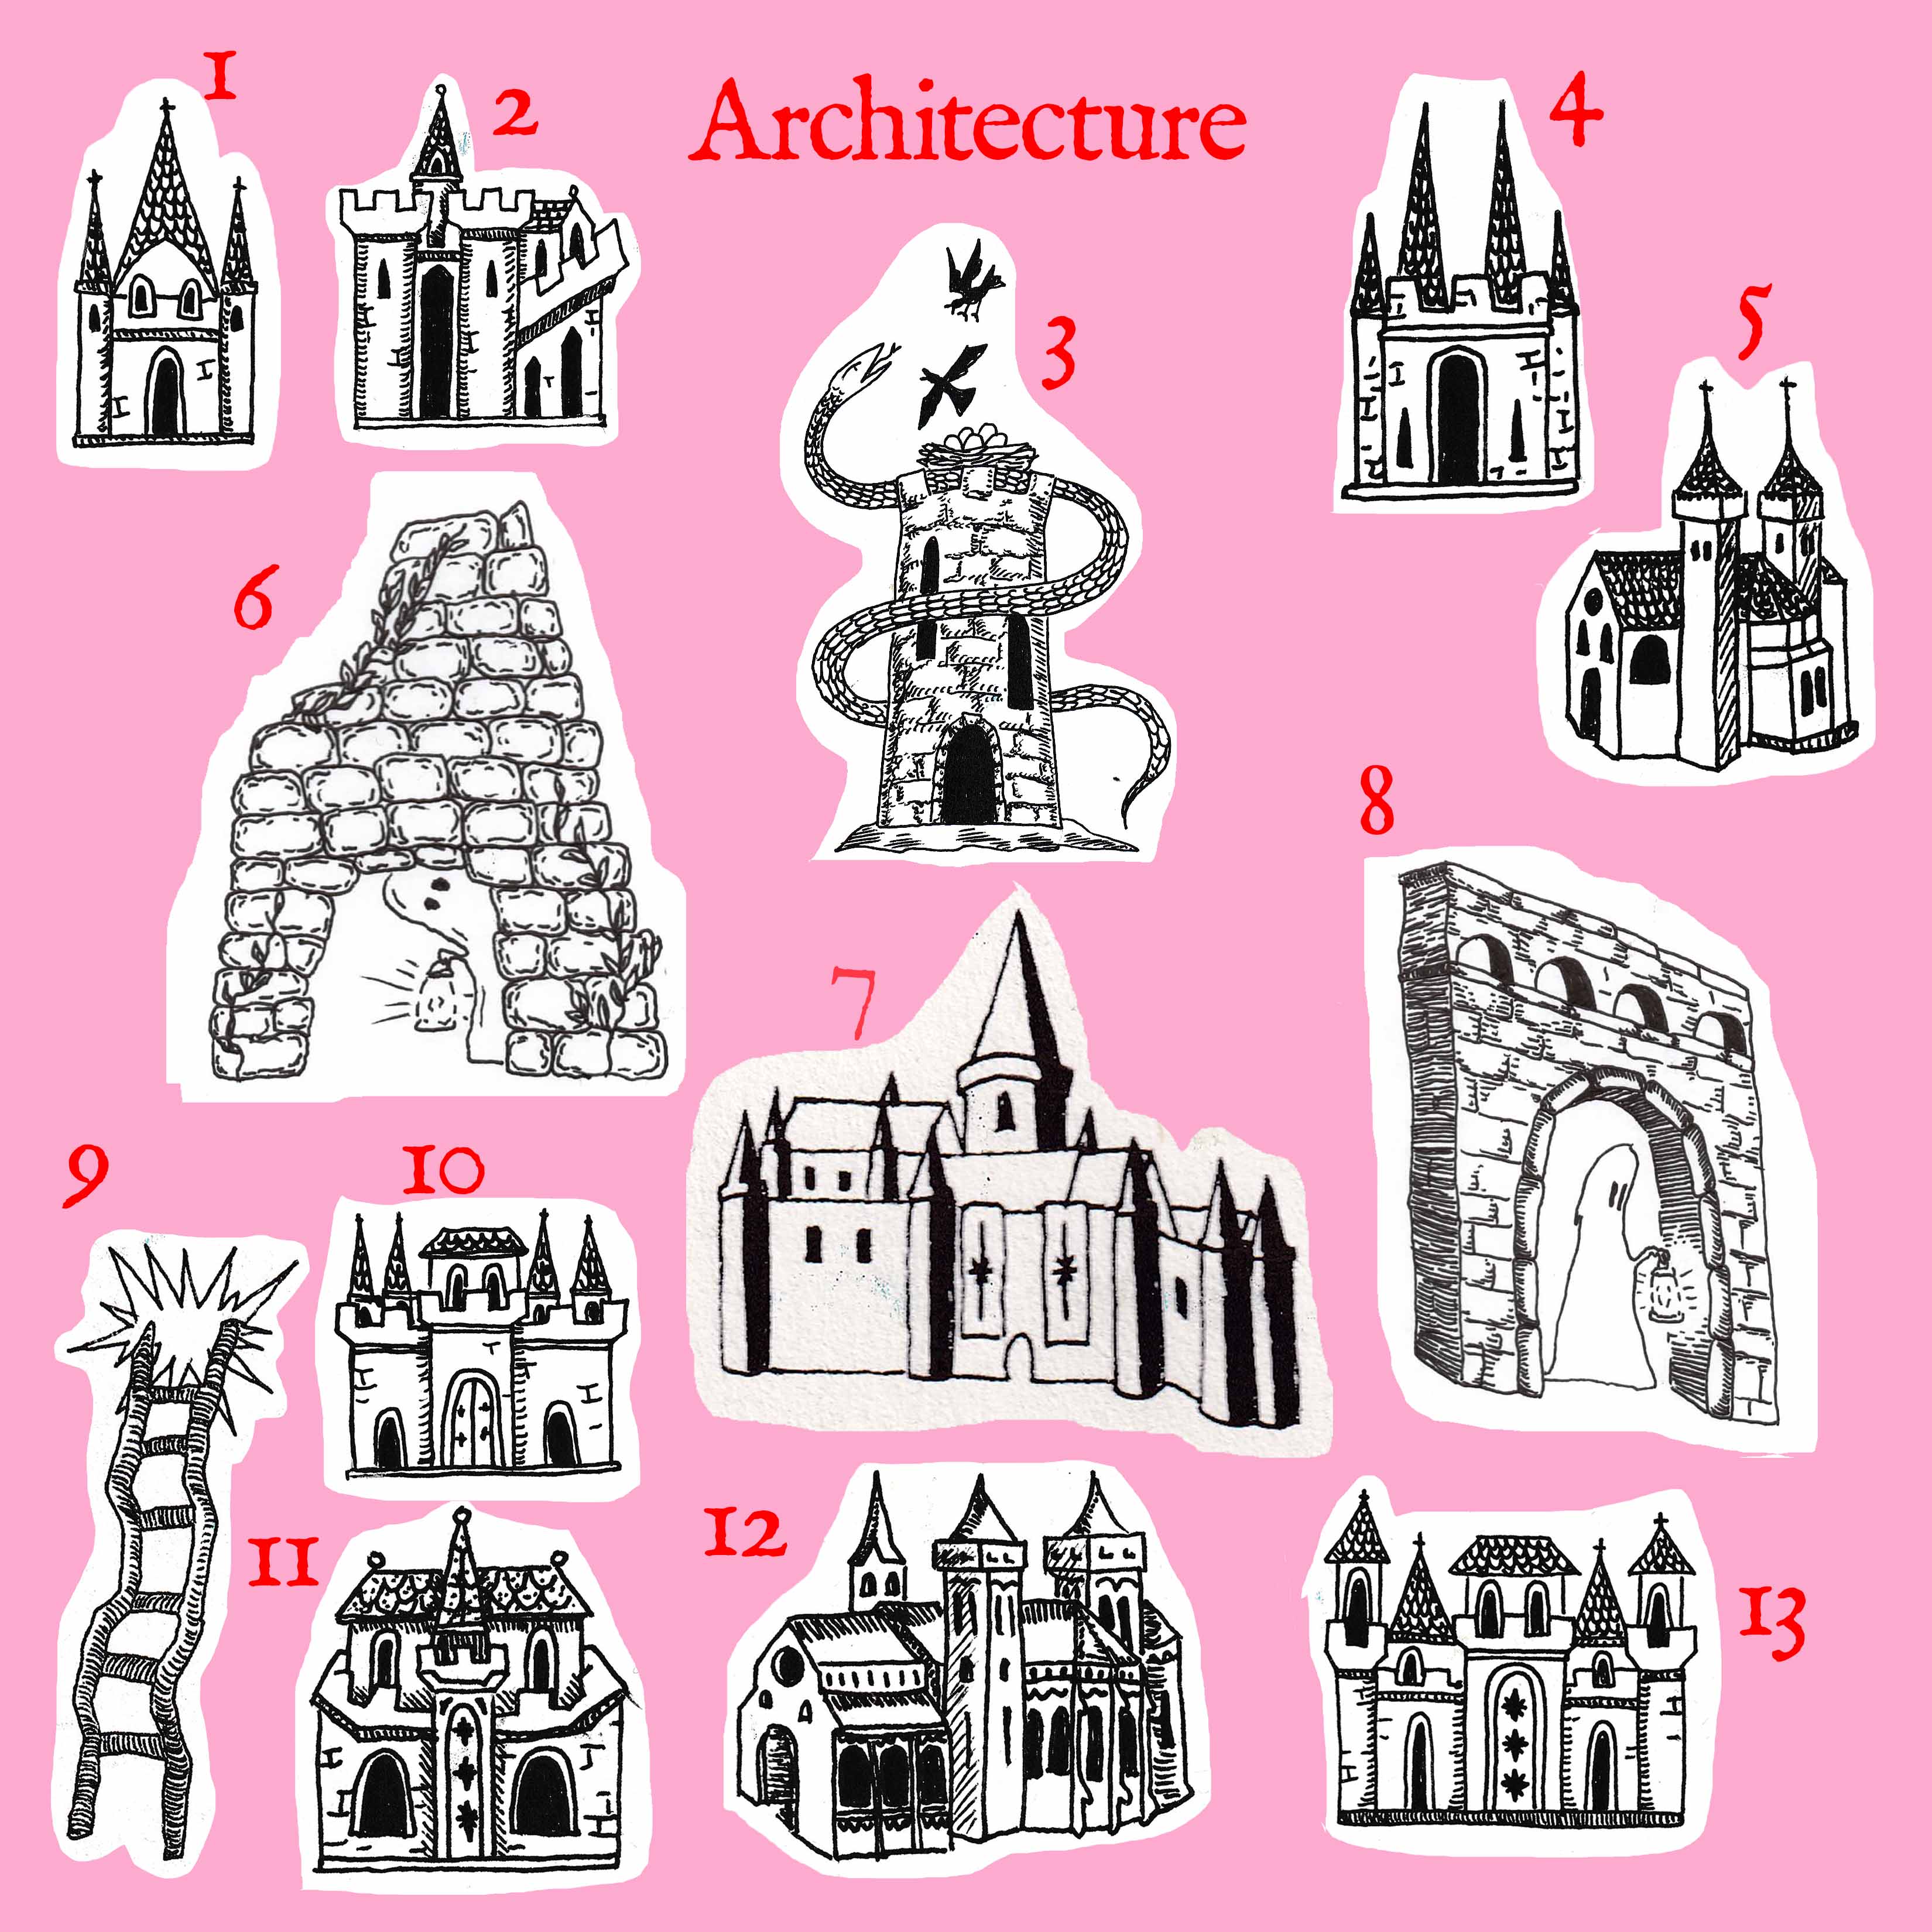 01-little hall, 02-medium hall, 03-birds defending a tower<br>
04-four caps, 05-monastery, 06-ghostly ruins, <br>
07-castle, 08- ghost in passageway, 09-crooked ladder, 10-quarters, <br>
11-knightley hall, 12-large hall, 13-5 towers
